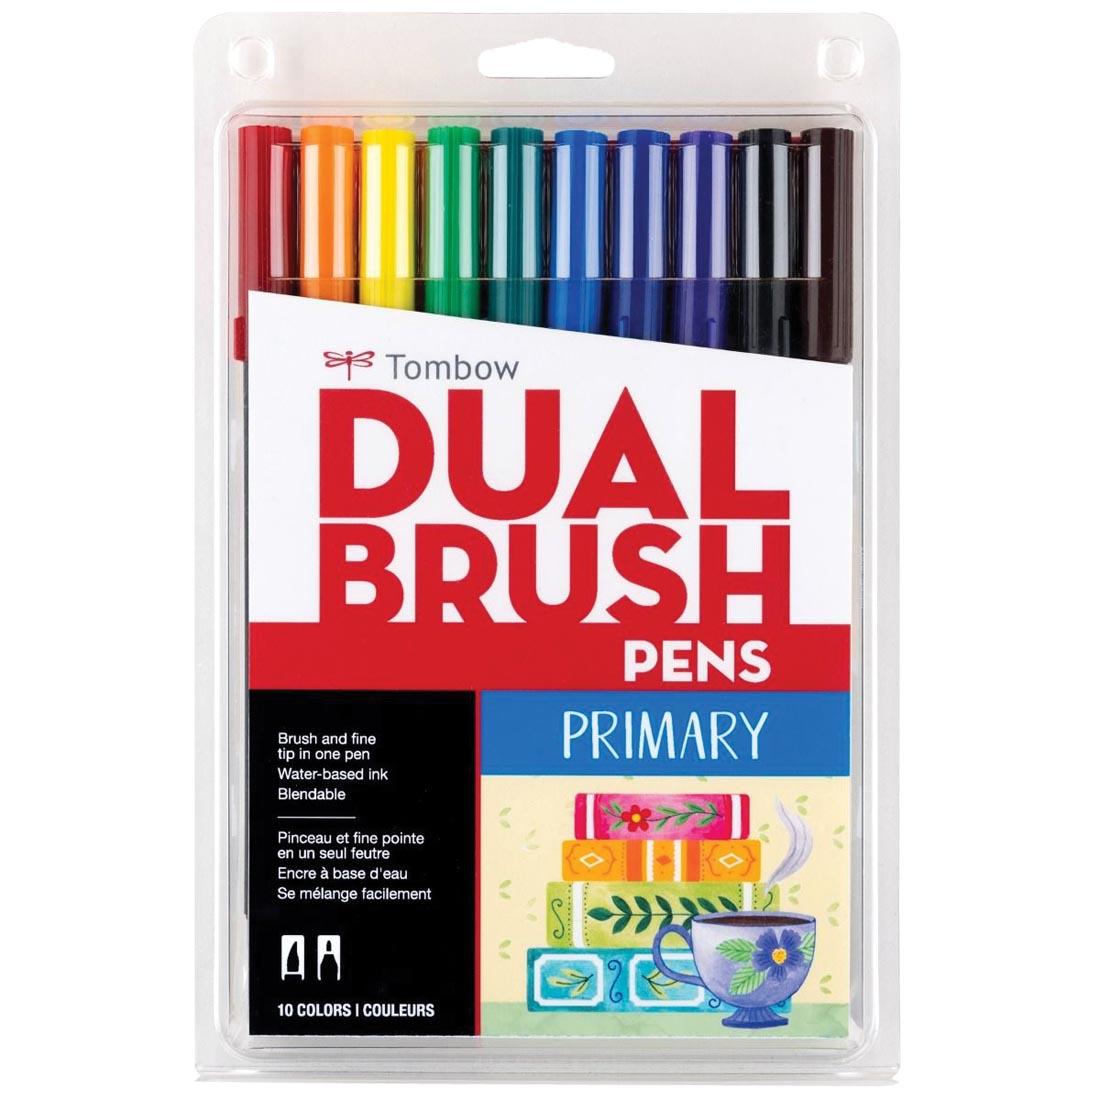 Tombow Primary Dual Brush Pens in package